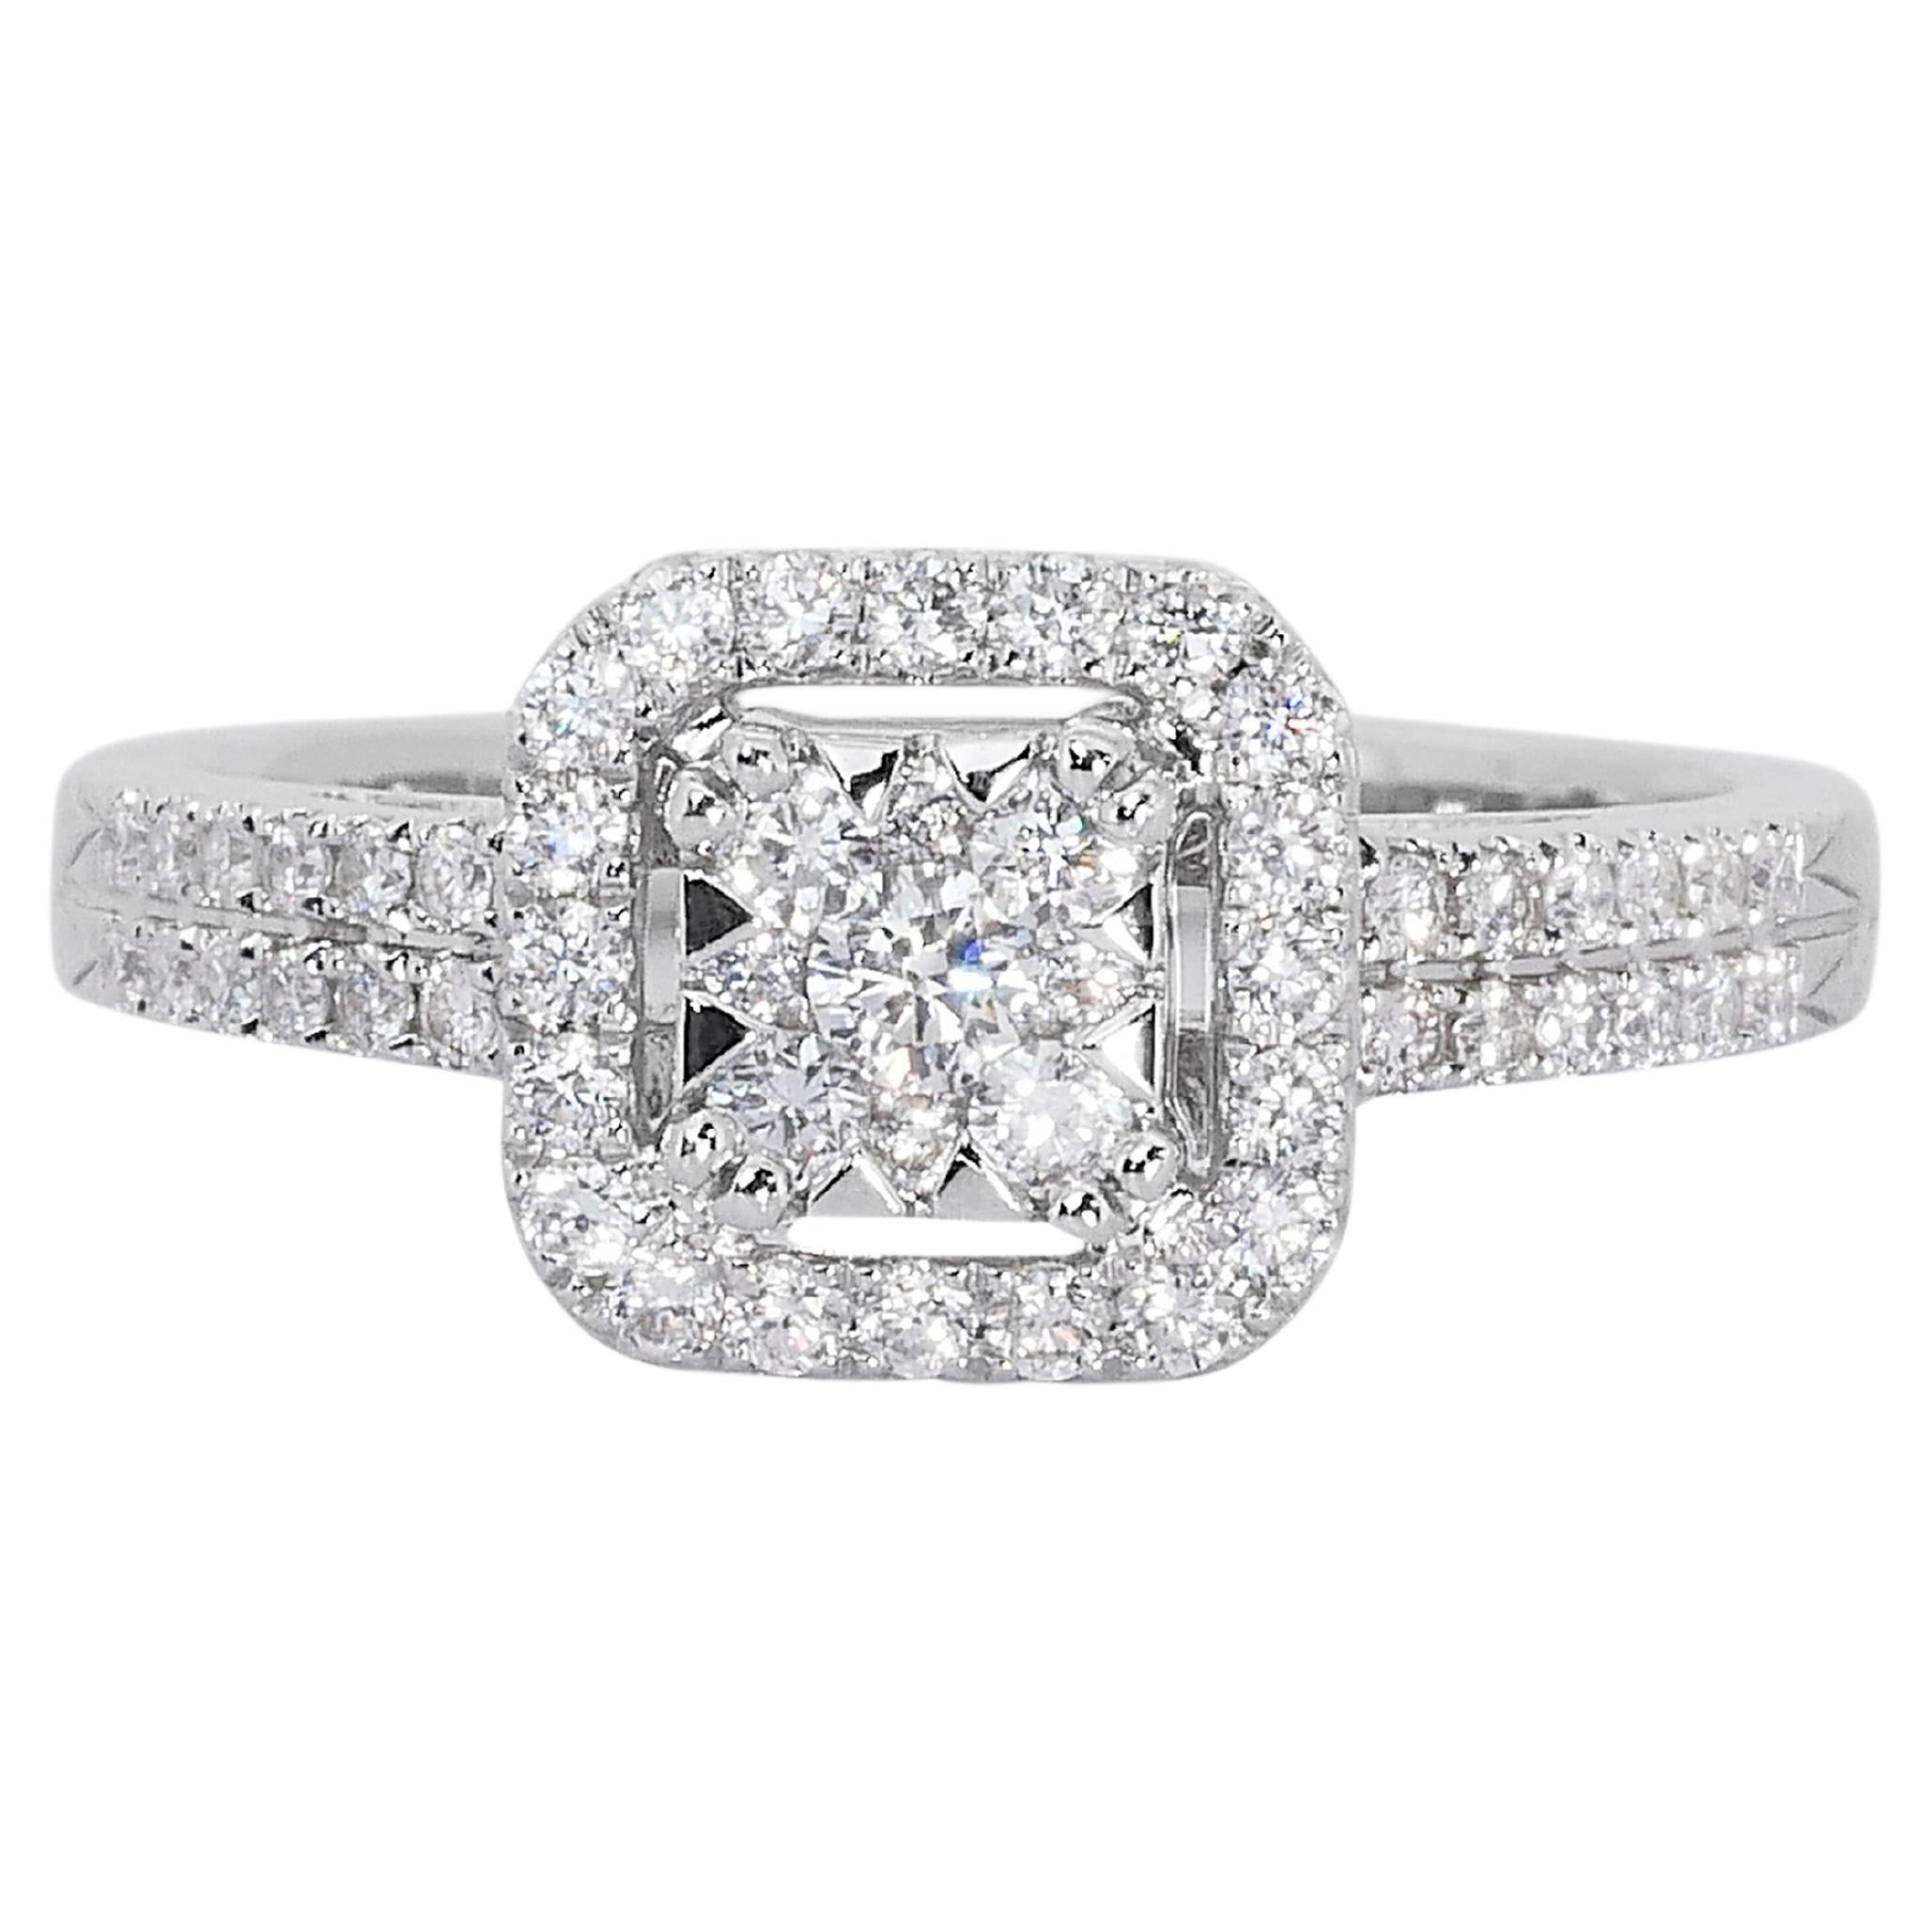 Dazzling 18K White gold Halo Ring w/ 1.0 ct total natural diamonds For Sale